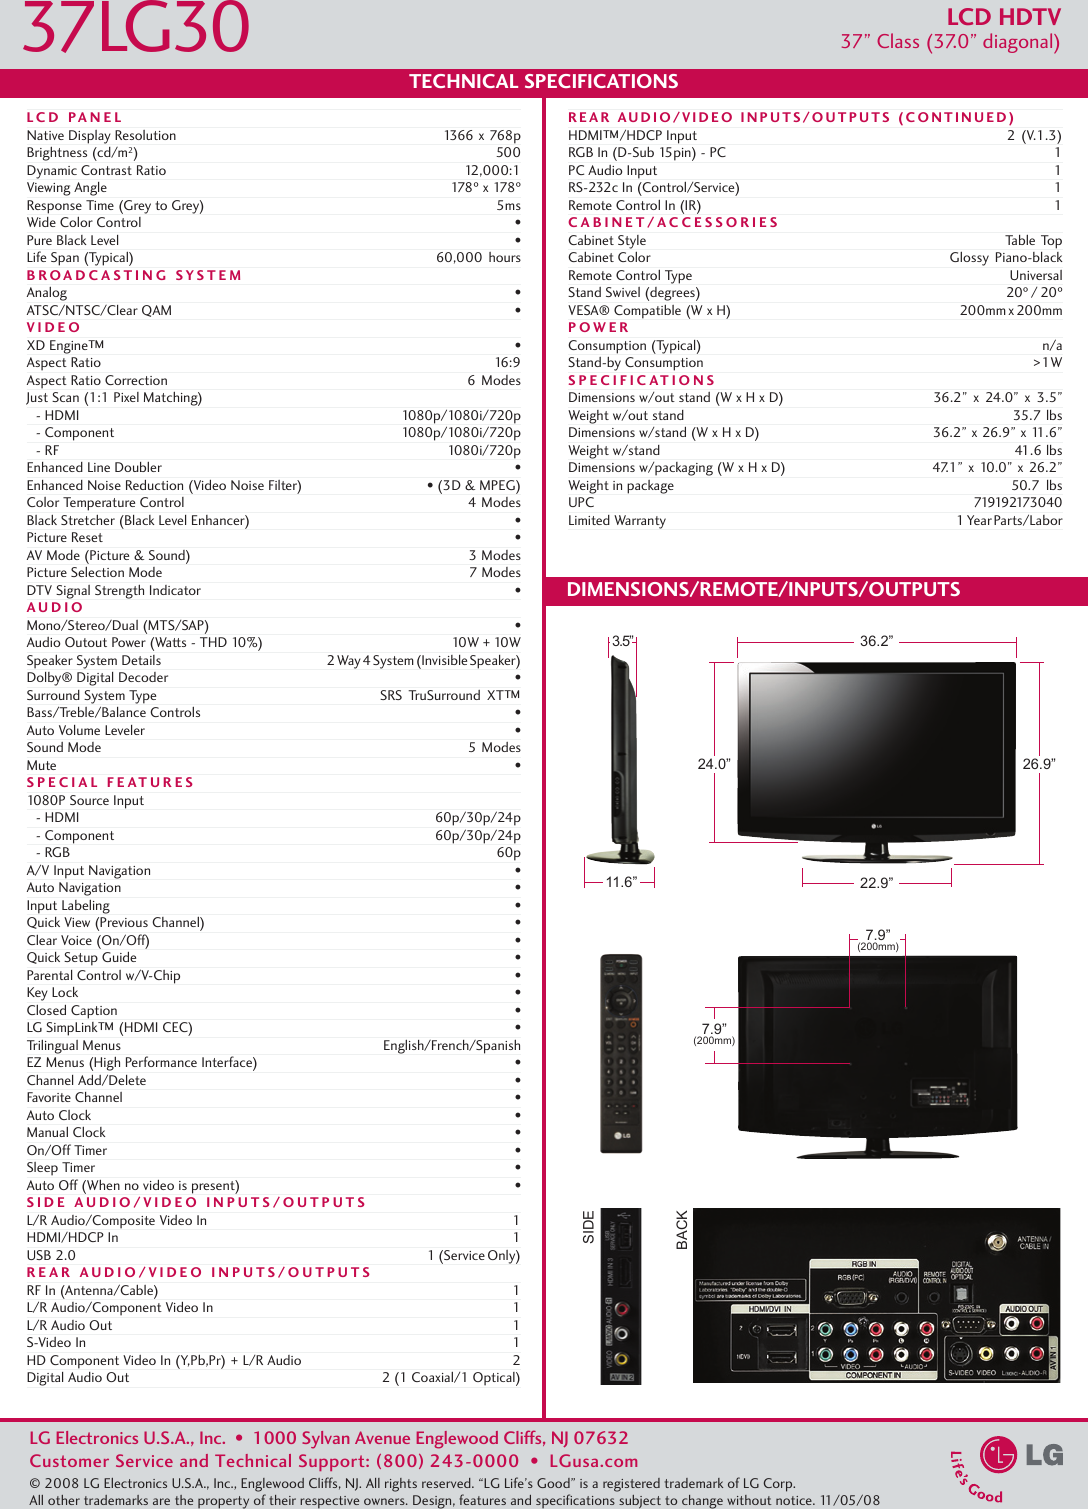 Page 2 of 2 - LG 37LG30 User Manual Specification Spec Sheet